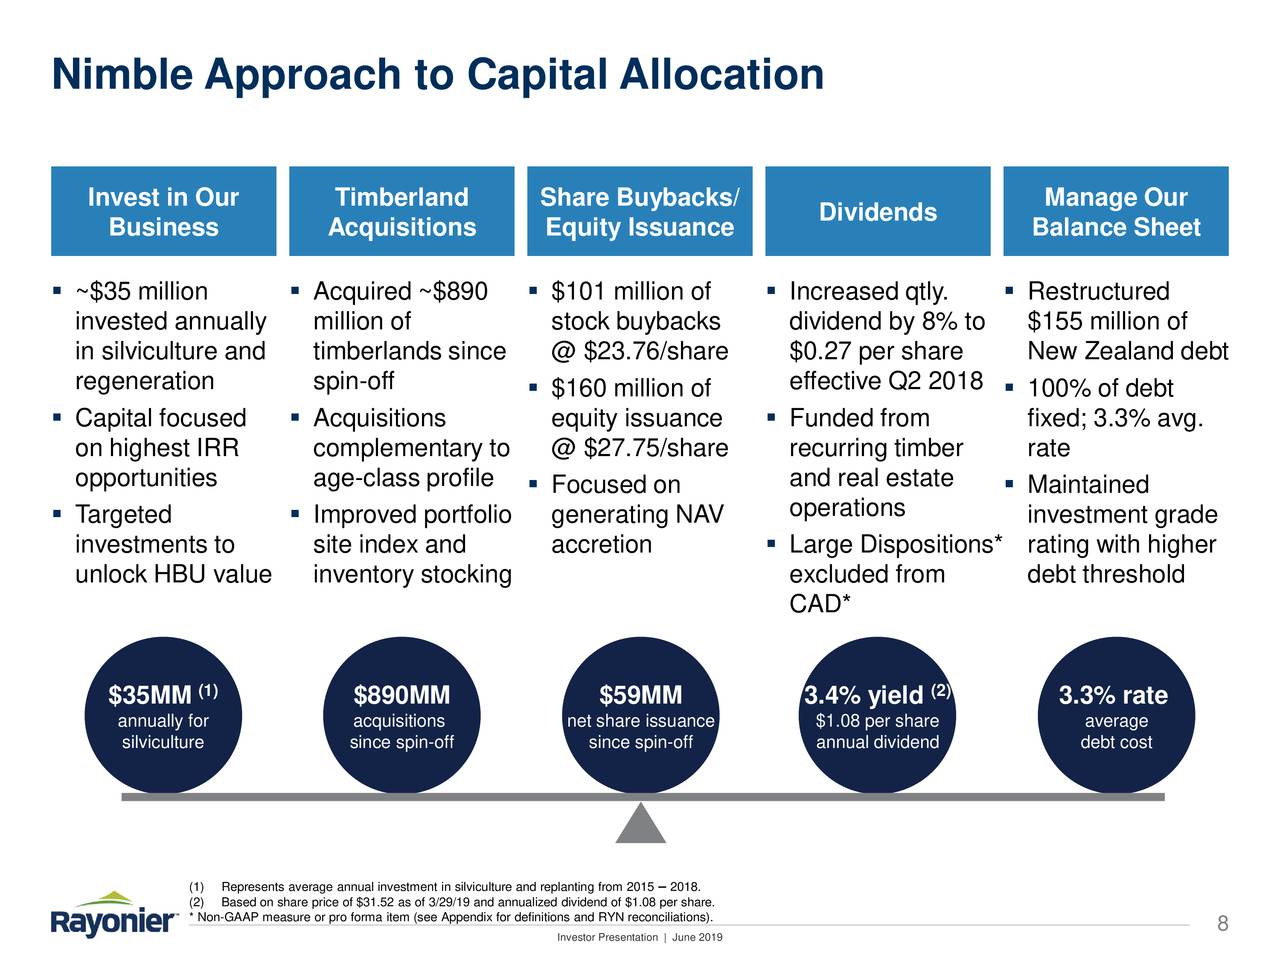 Nimble Approach to Capital Allocation